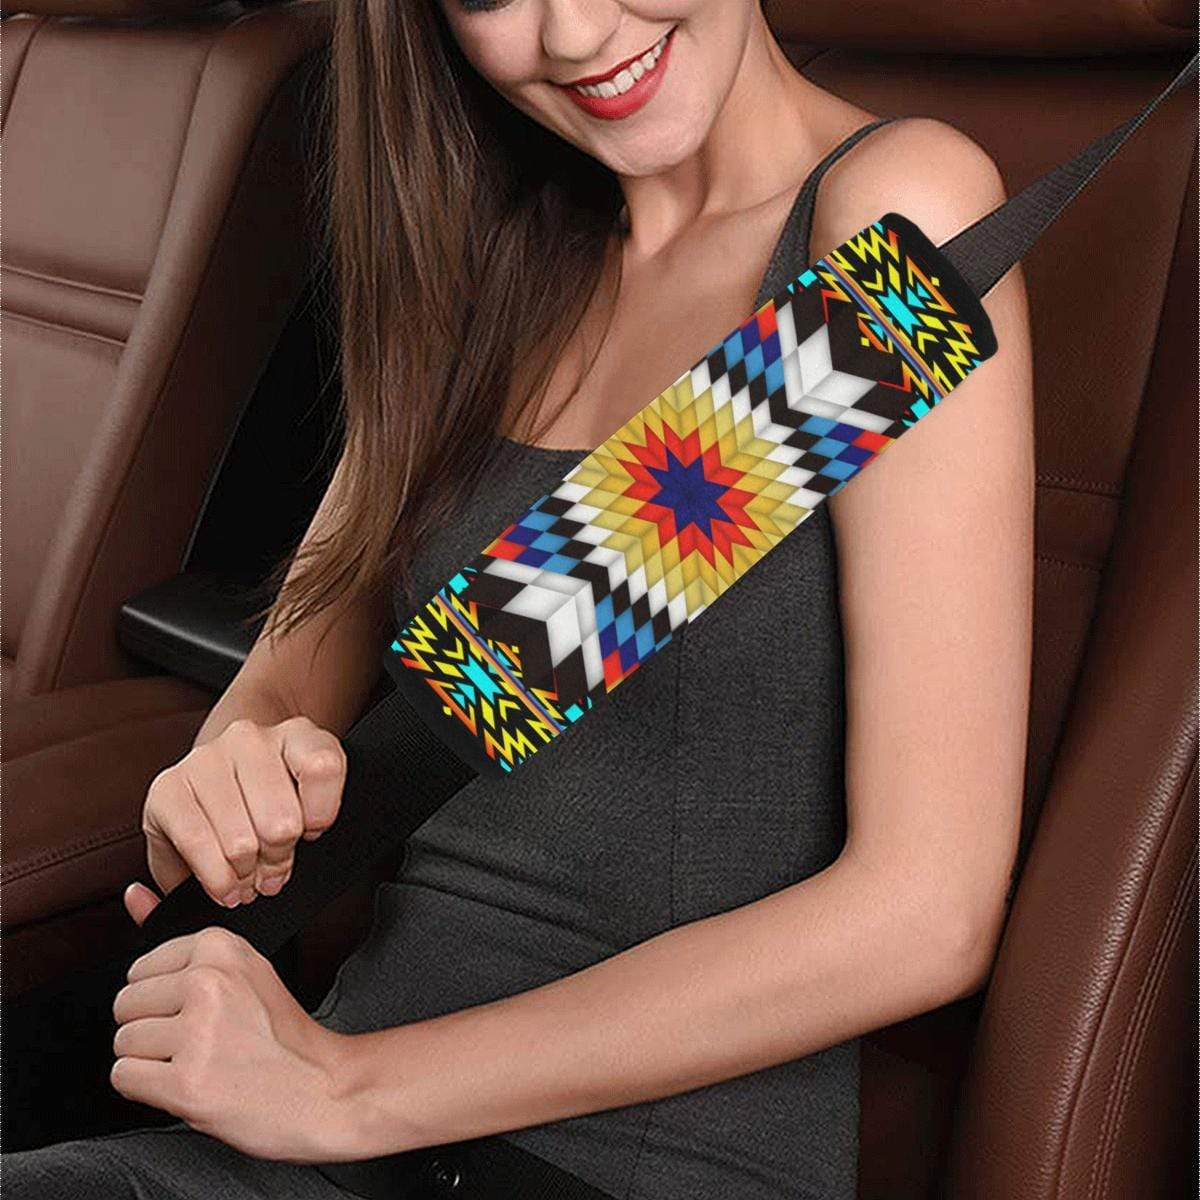 Blackfire and Turquoise Star Car Seat Belt Cover 7''x12.6'' Car Seat Belt Cover 7''x12.6'' e-joyer 